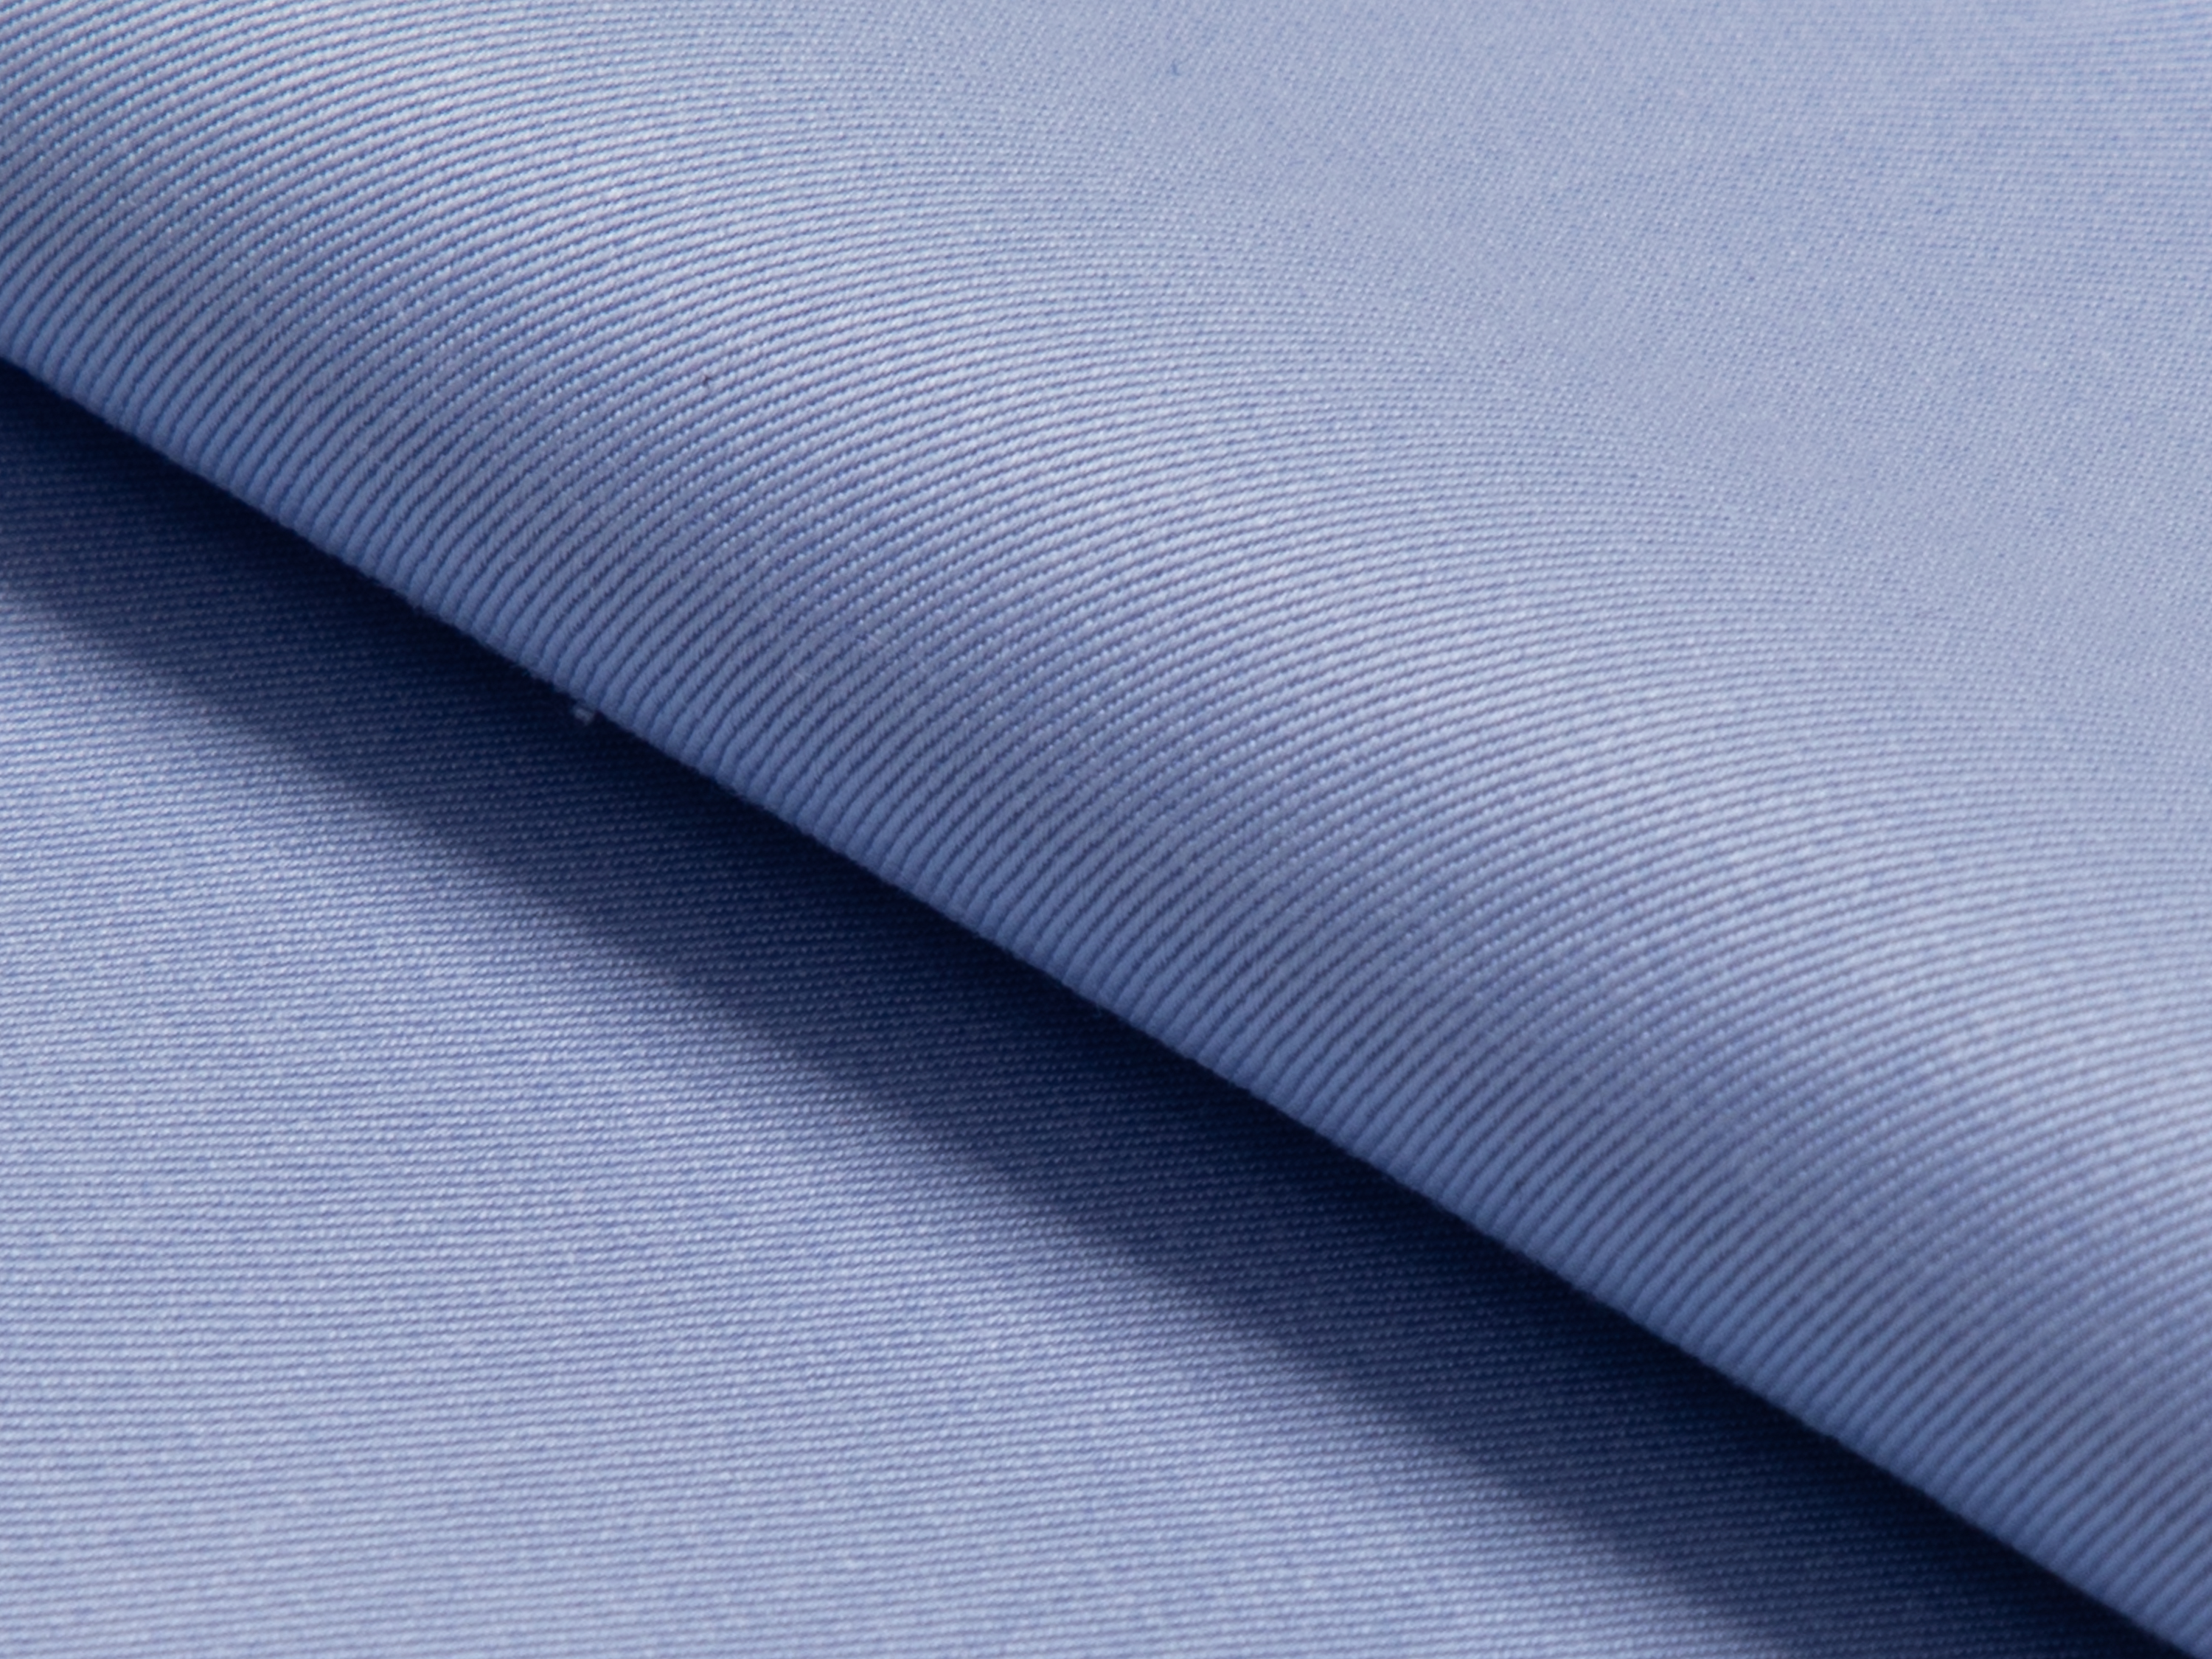 Buy tailor made shirts online -  - Twill Blue